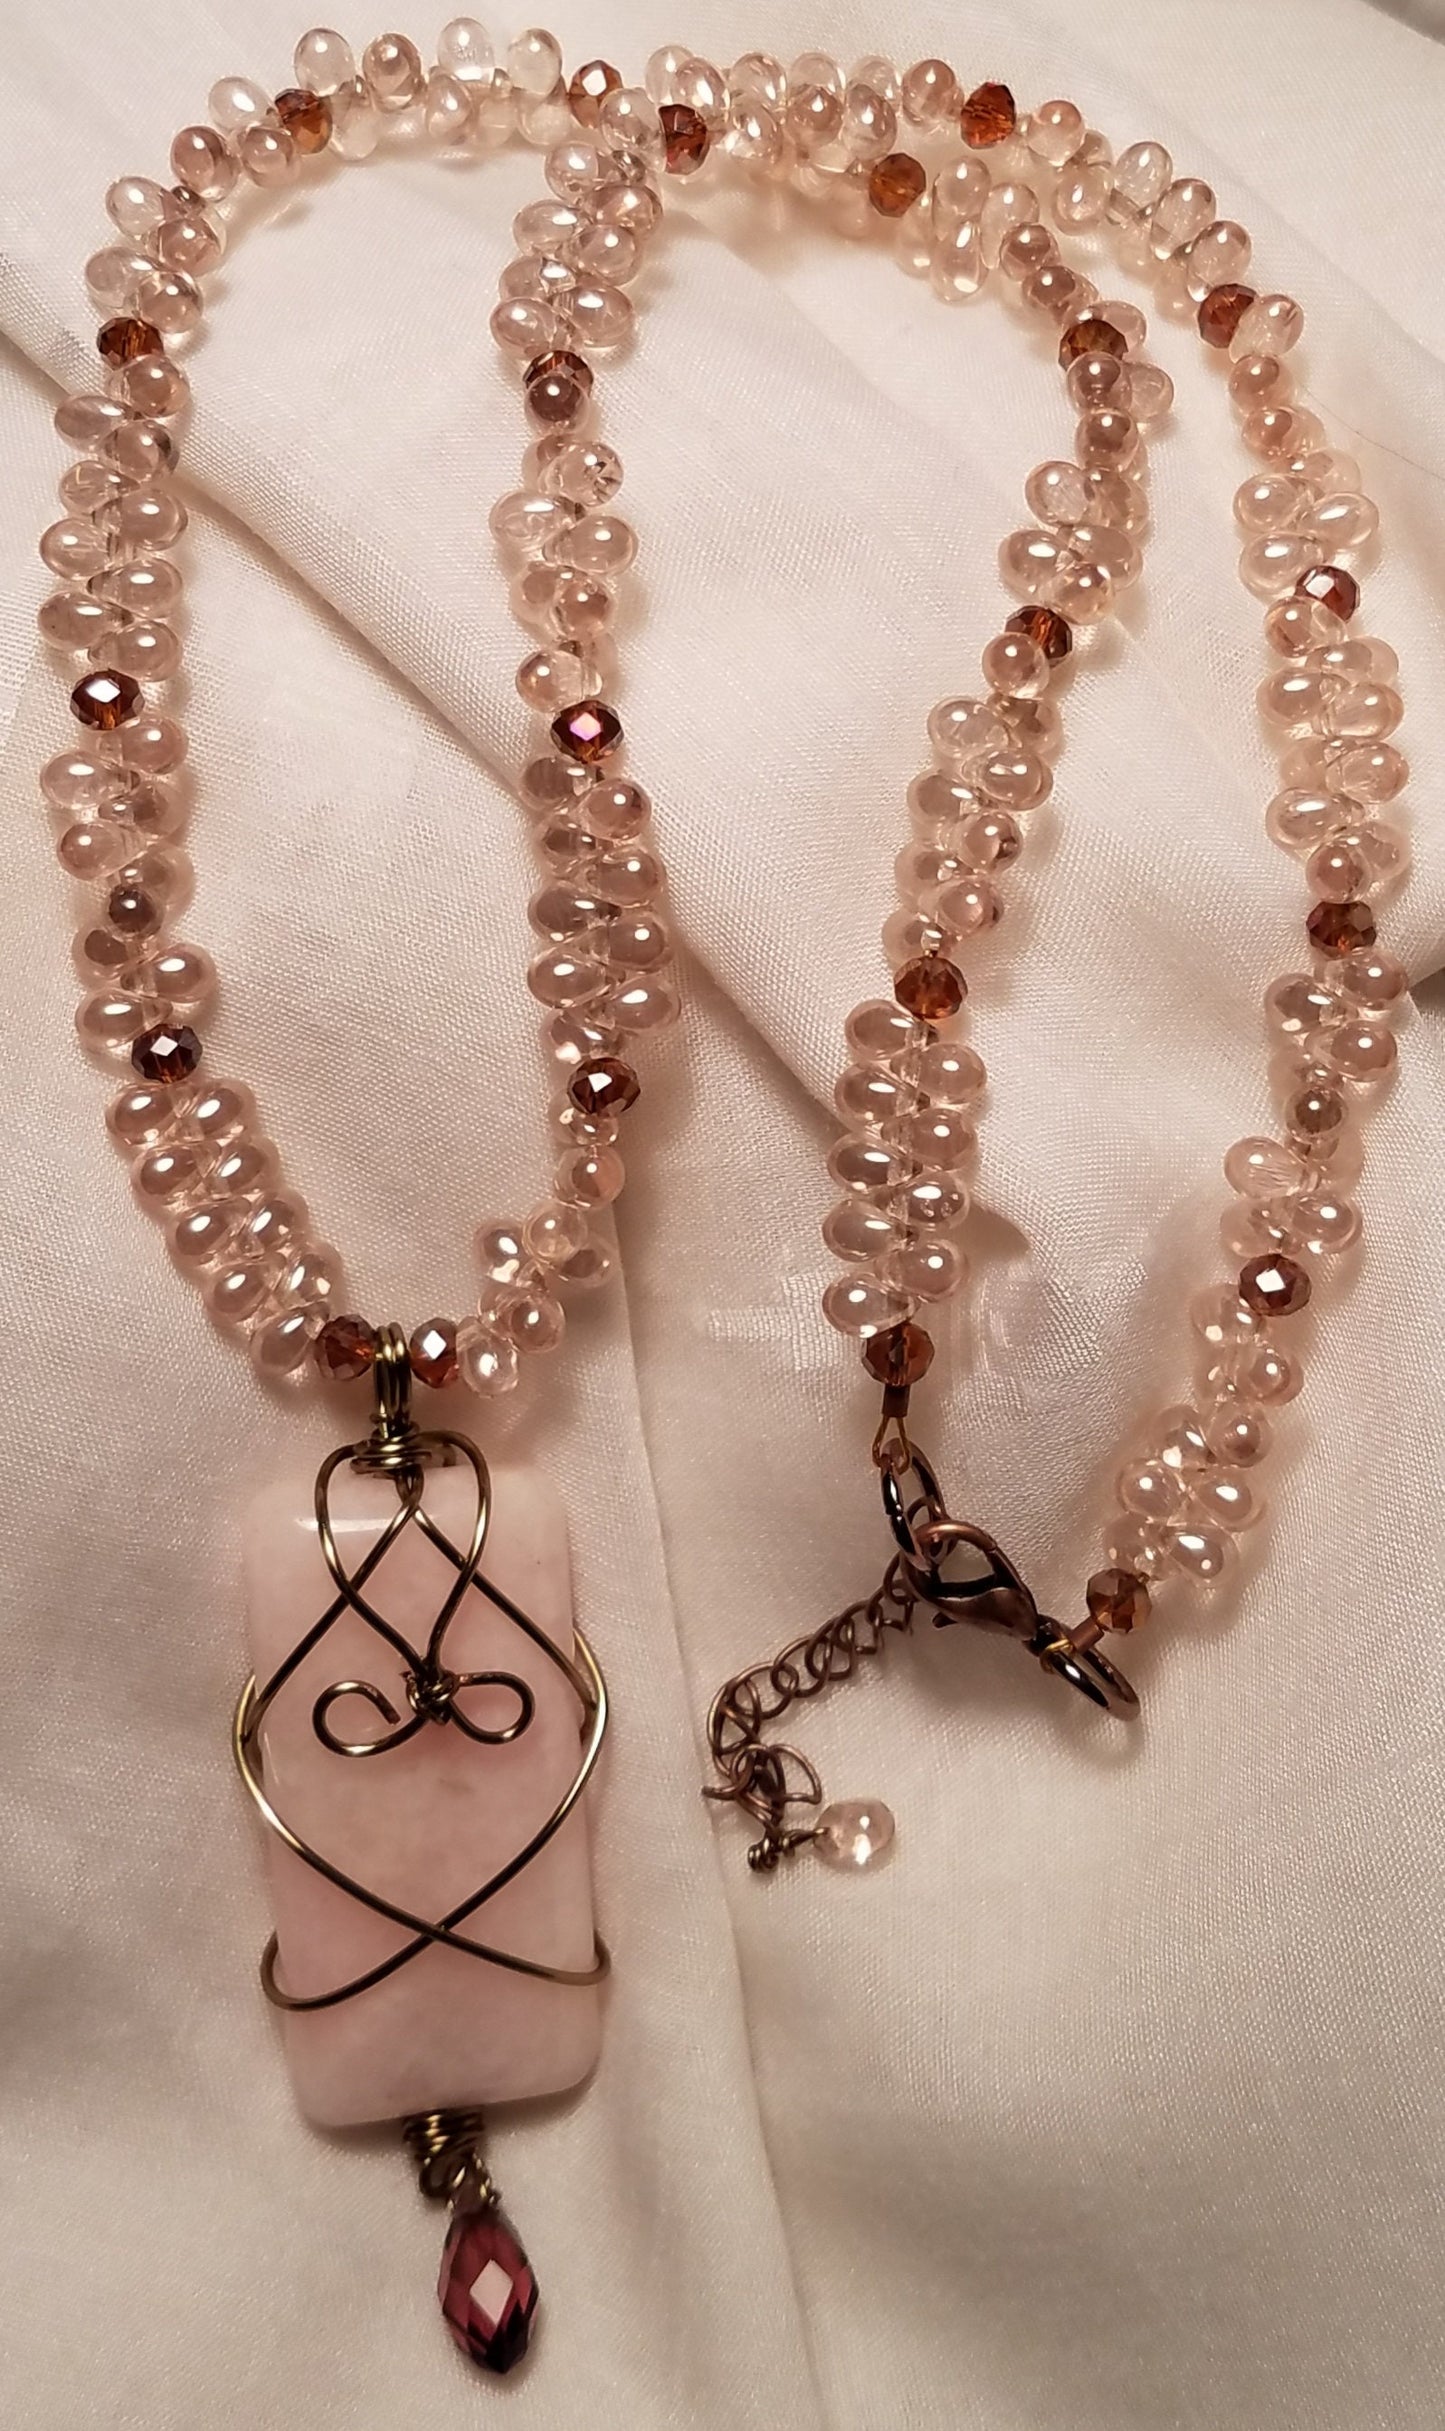 Rose Quartz Pendant with Antique Brass Wire Work and Drop Bead Necklace